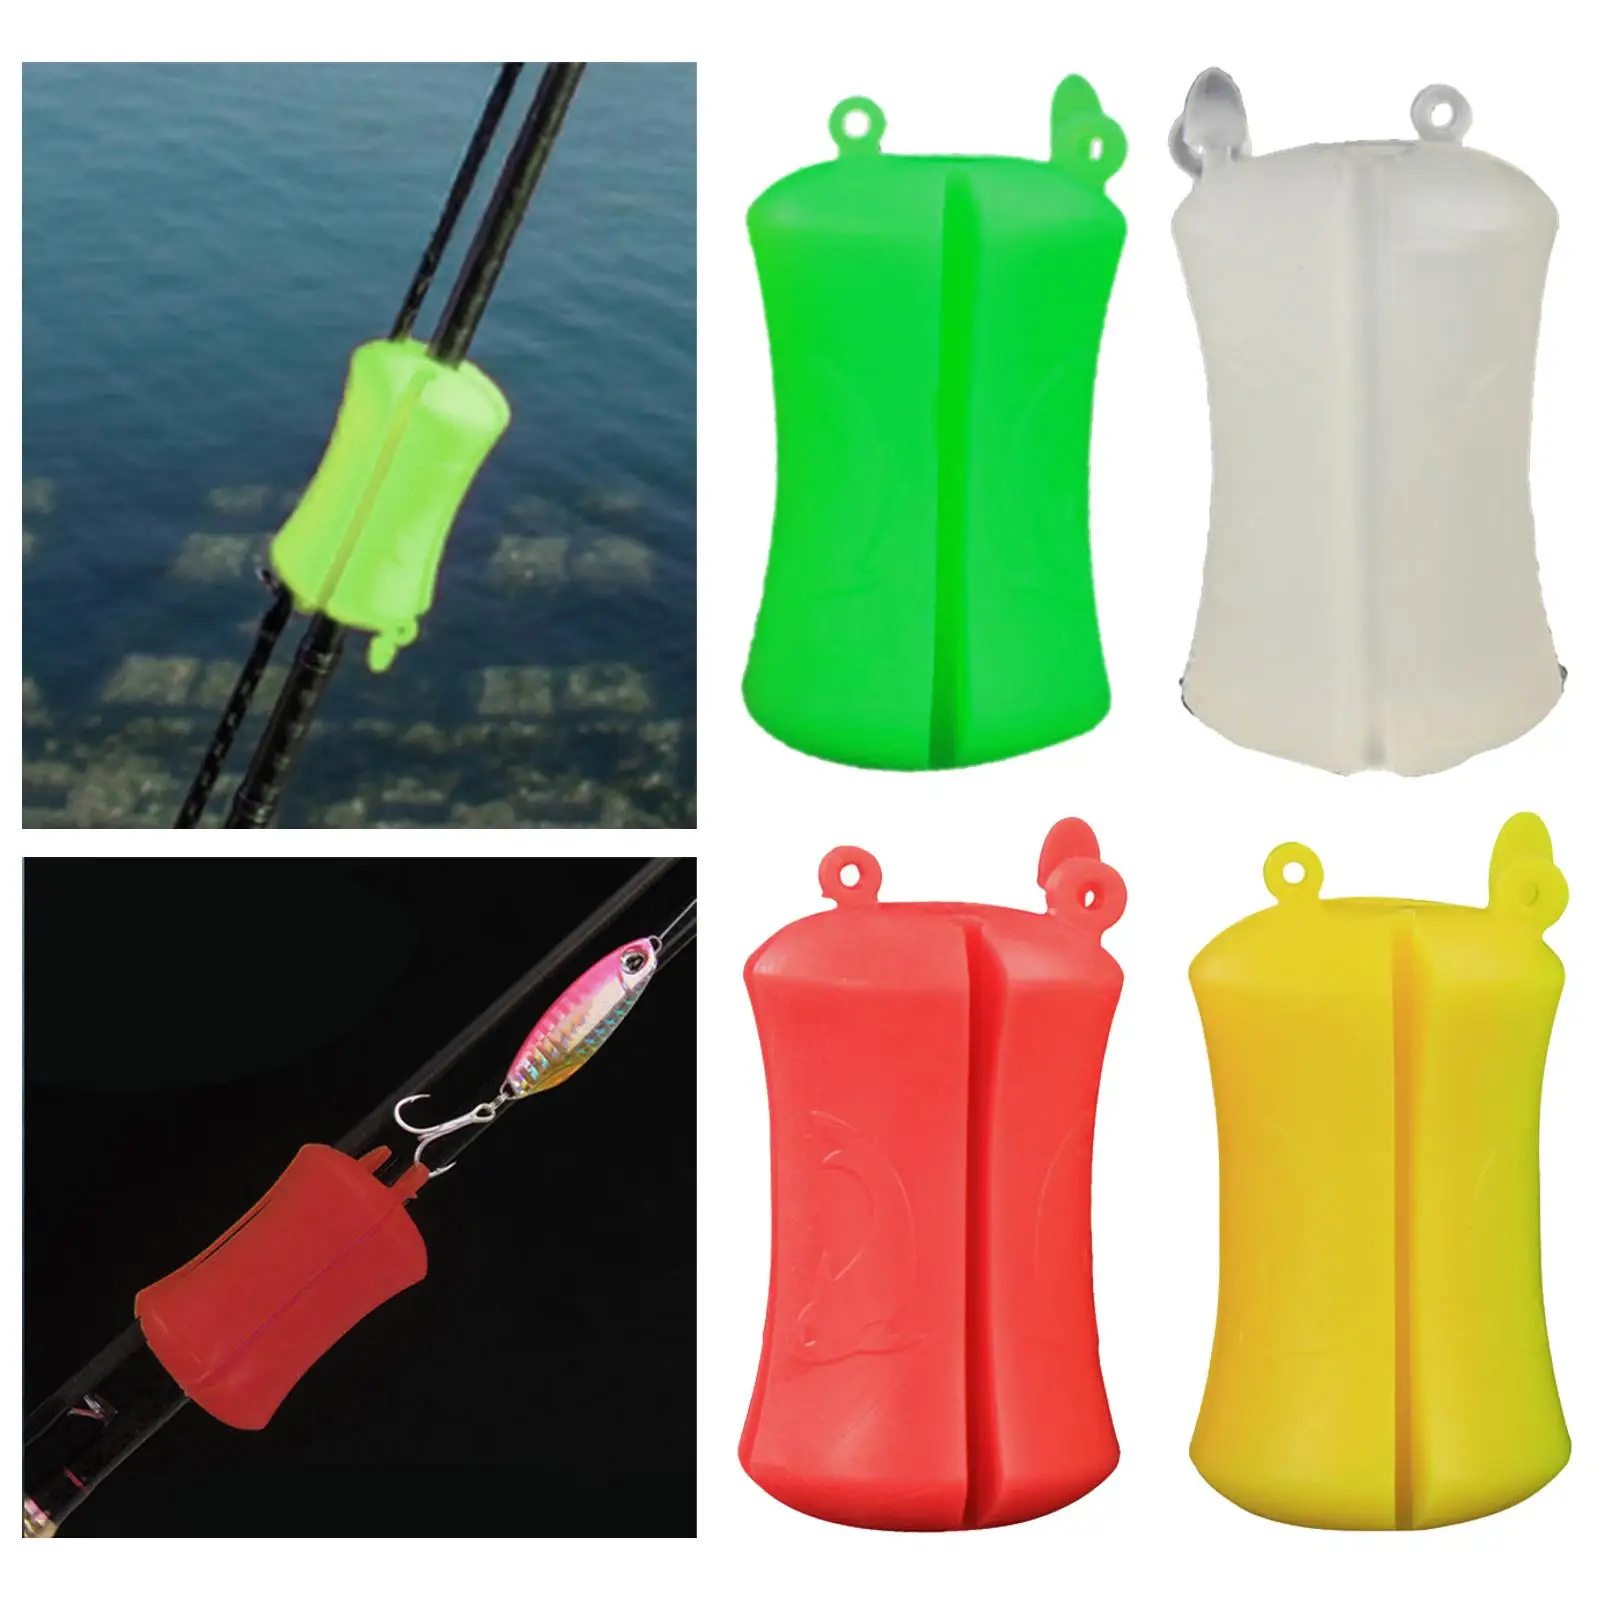 4Pcs Fishing Rod Fixed Ball Pole Clip Multifunctional Silicone Wear Resistant Flexible Soft Fishing Tube Connectors for Supplies